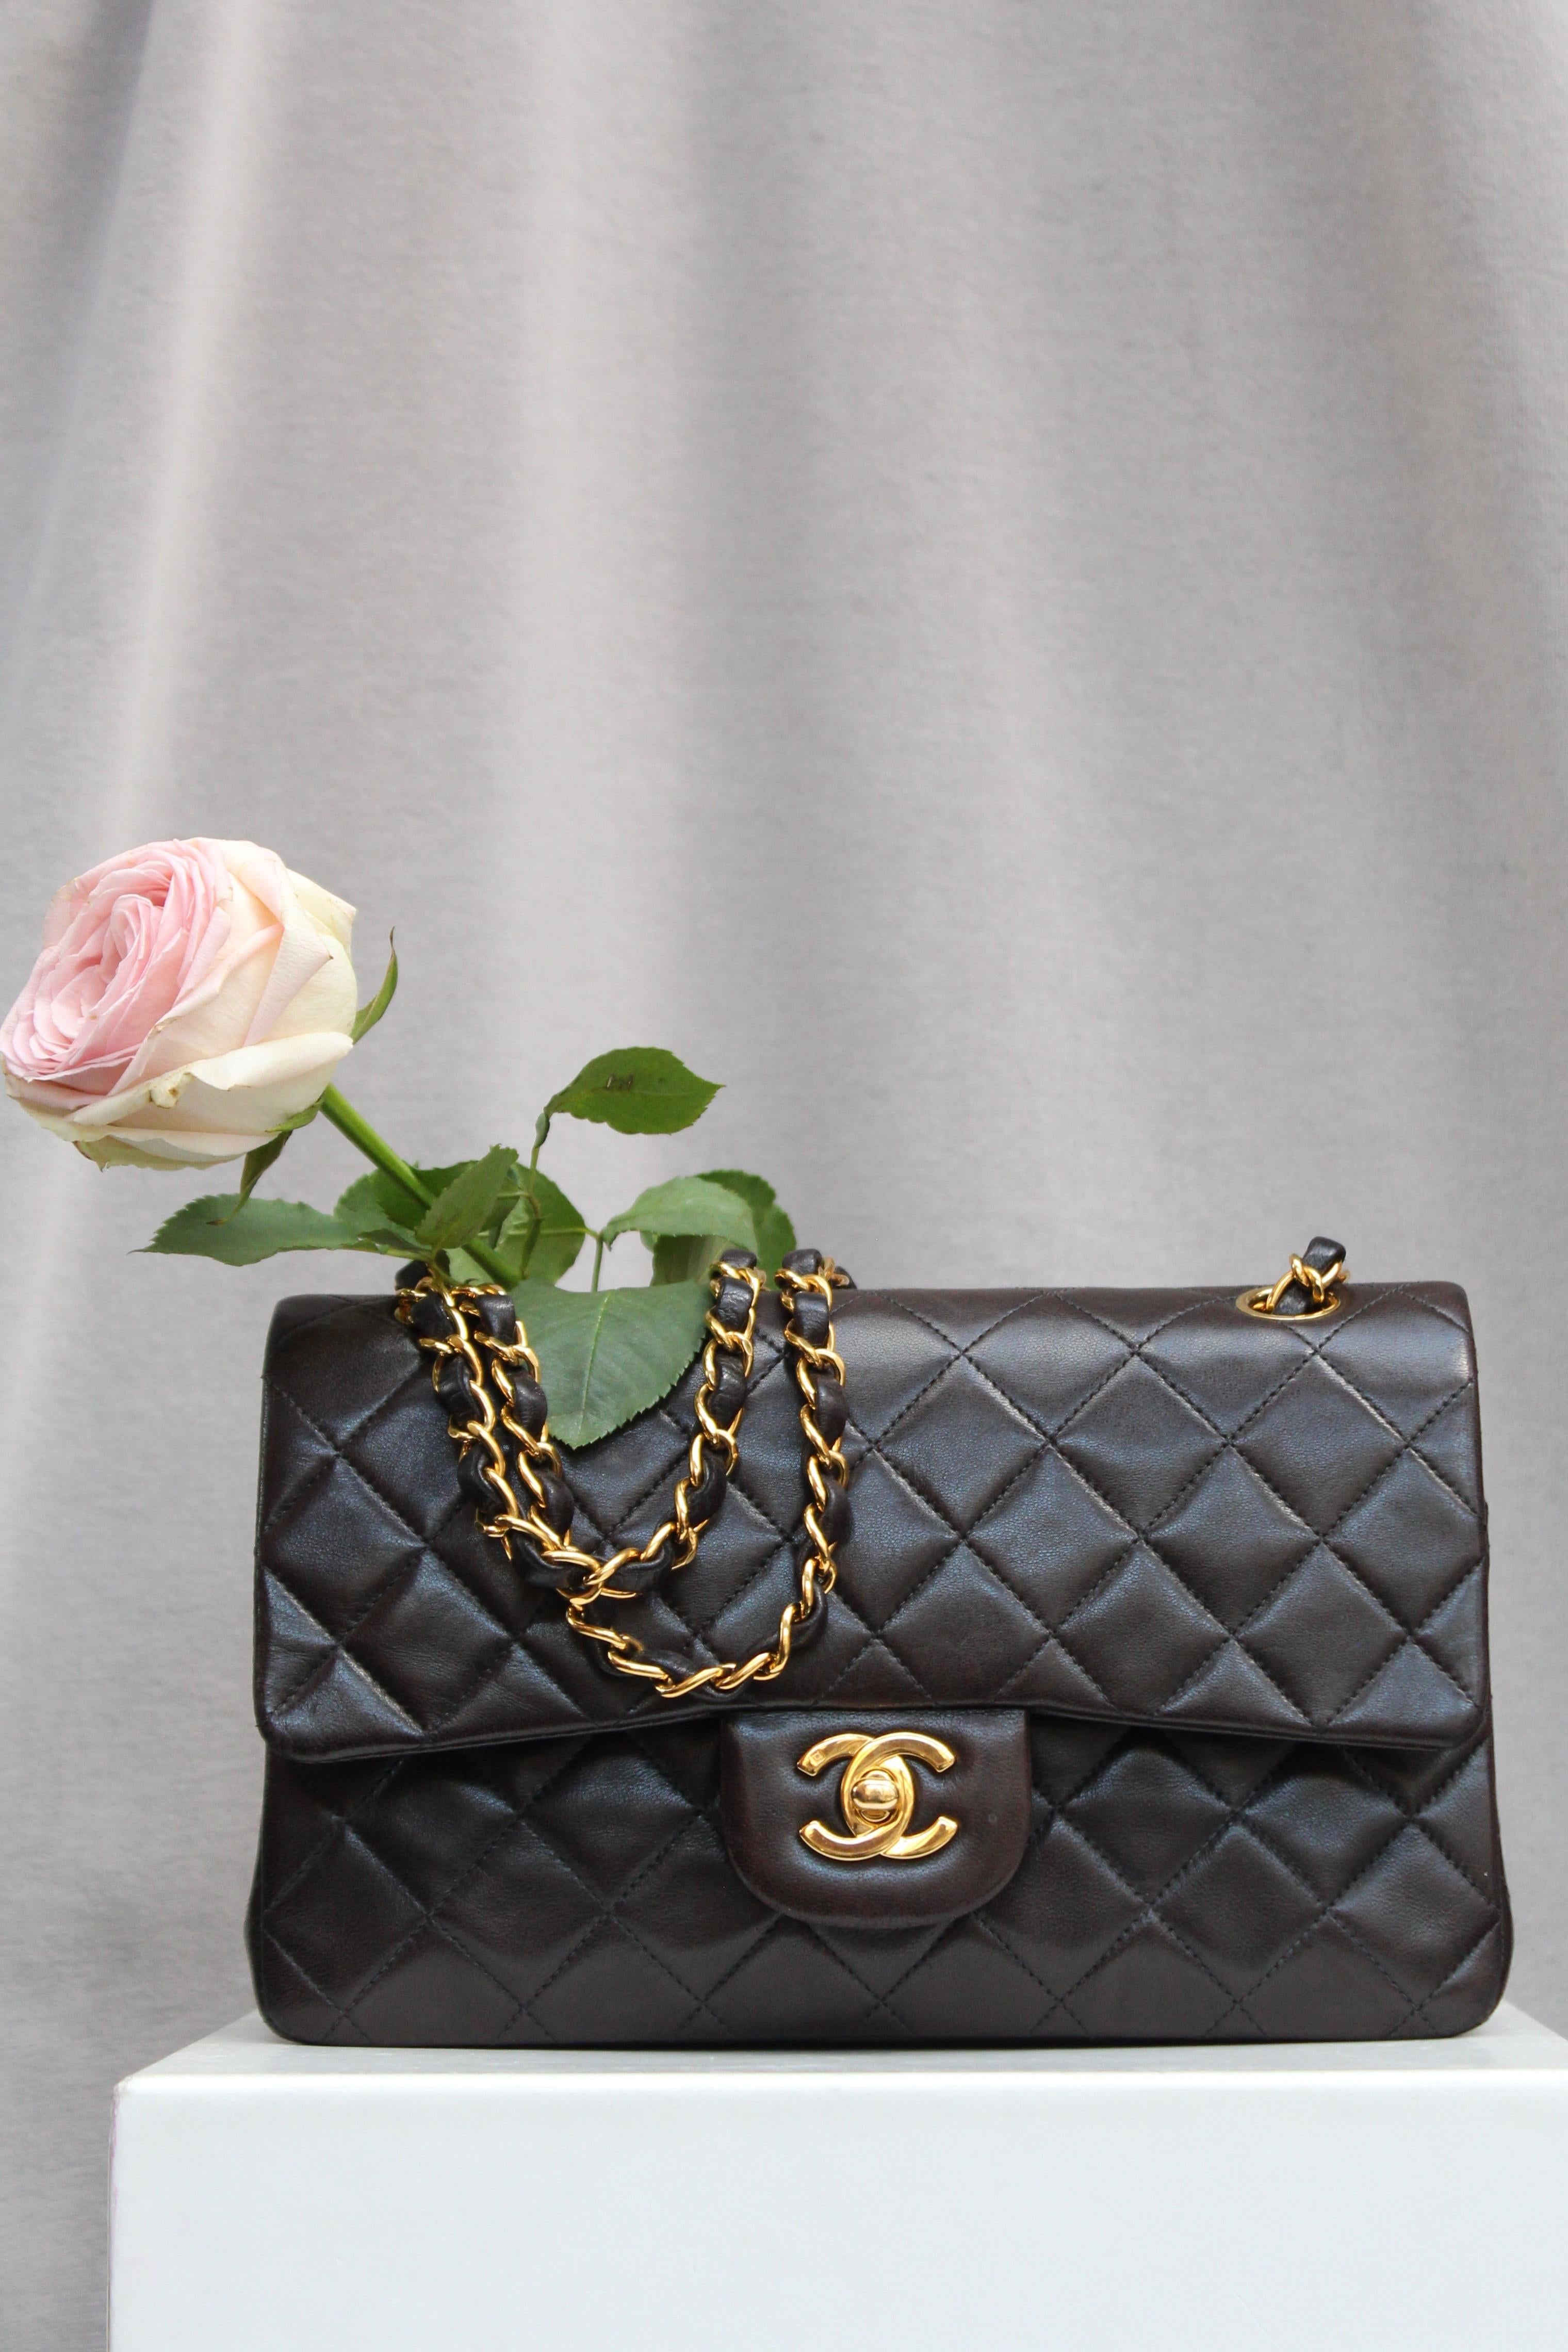 CHANEL – Iconic classic “Timeless” bag in brown quilted lambskin, with its double flap and gilded metal hardware.It can be worn over the shoulder or cross-body thanks to a double sliding chain entwined with brown leather. The back features a patch